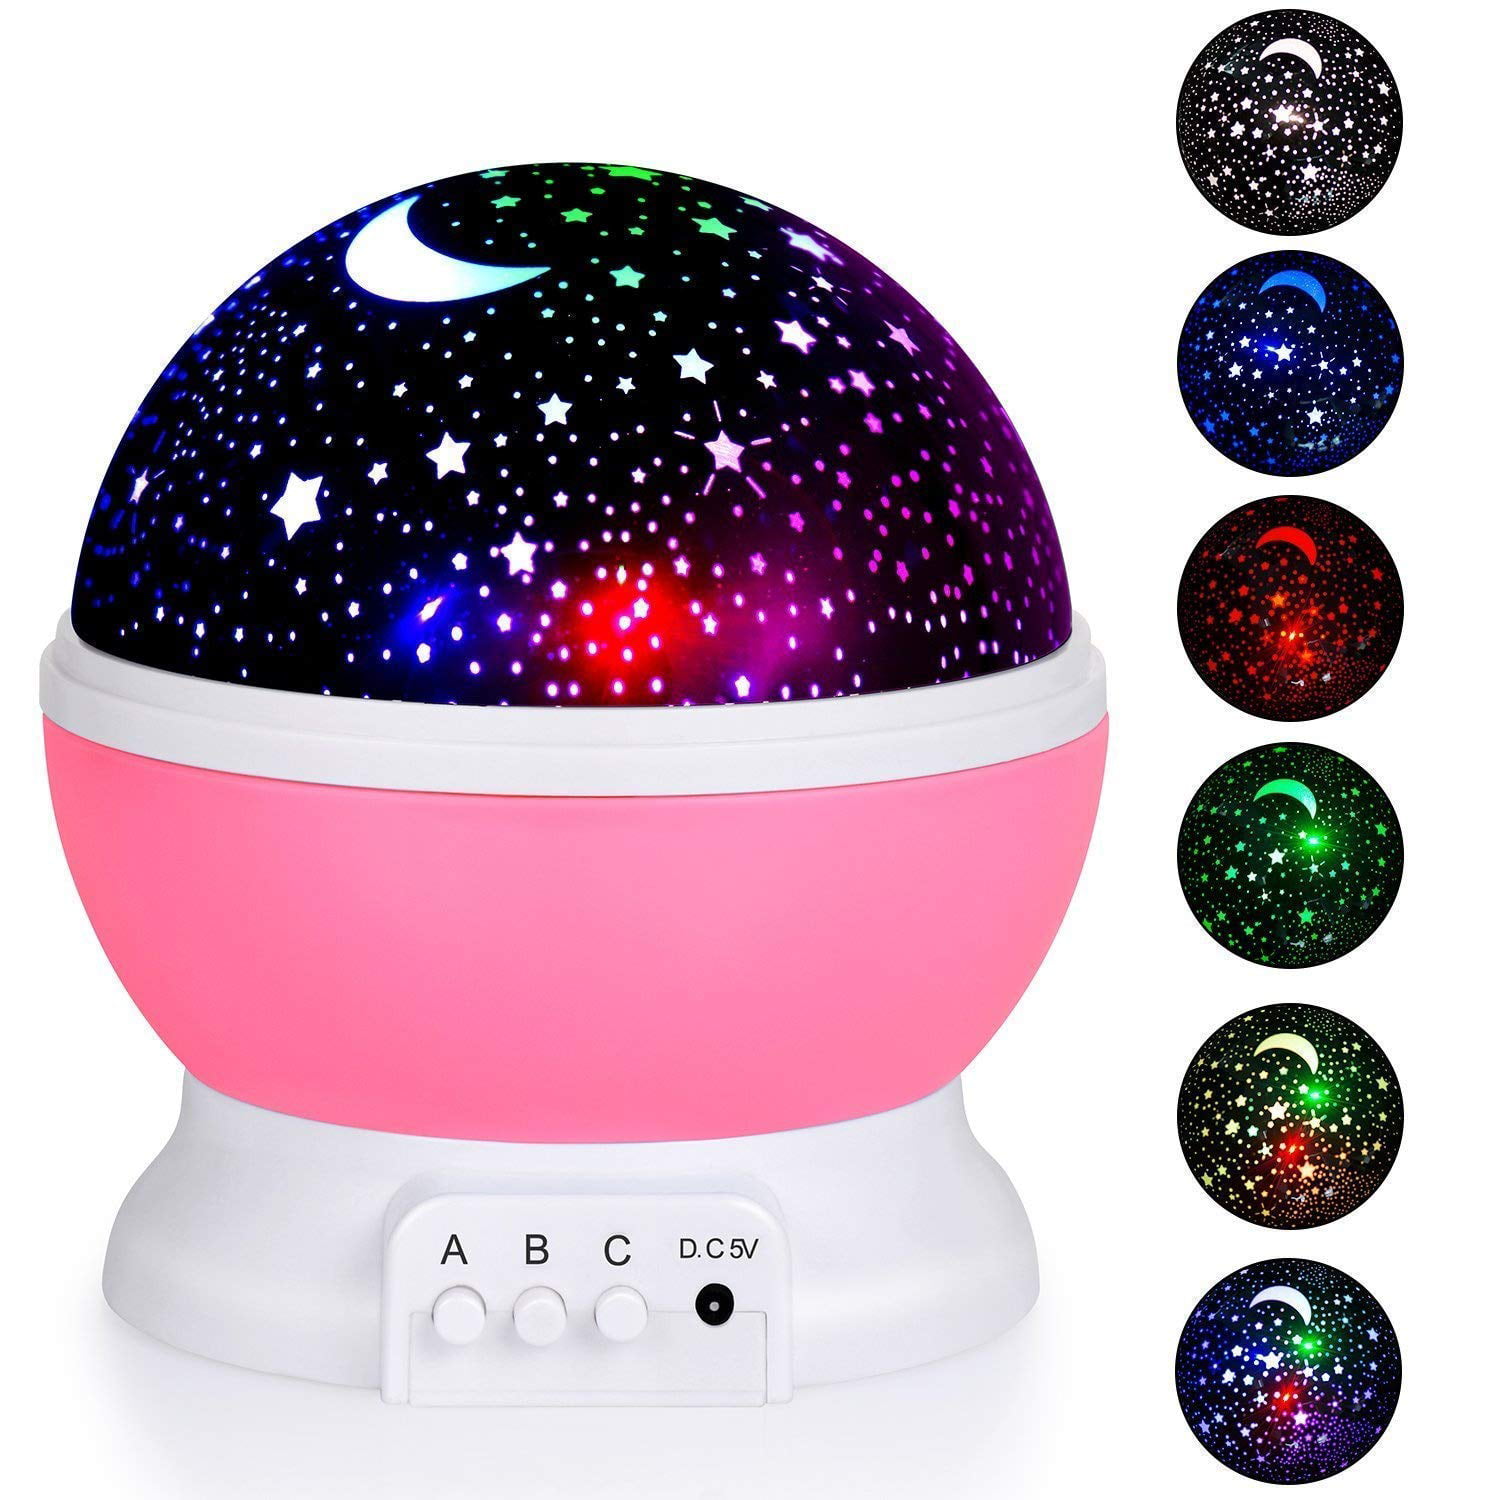 TOP Gift Newest Star Night Light Star Light Projector as Best Gifts for Kids and Baby Bedroom. 